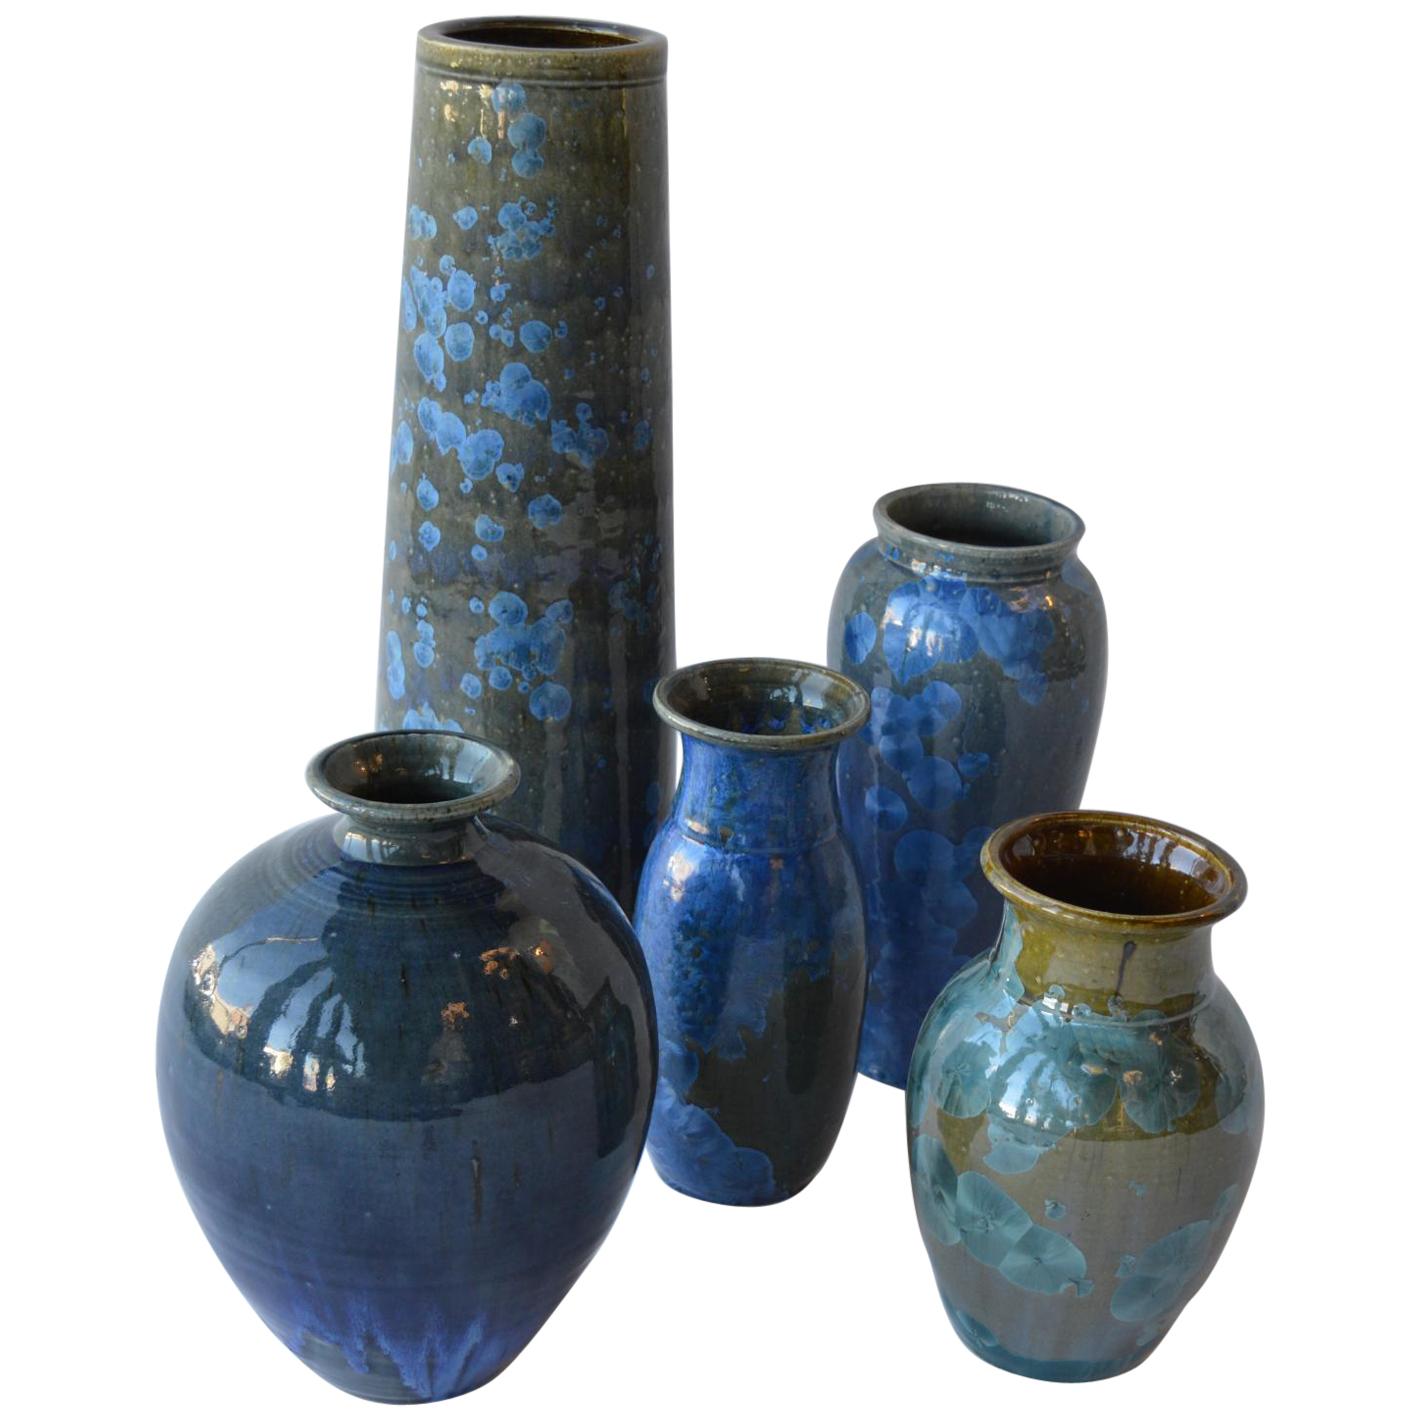 Collection of Crystalline Glazed Ceramics in Blue